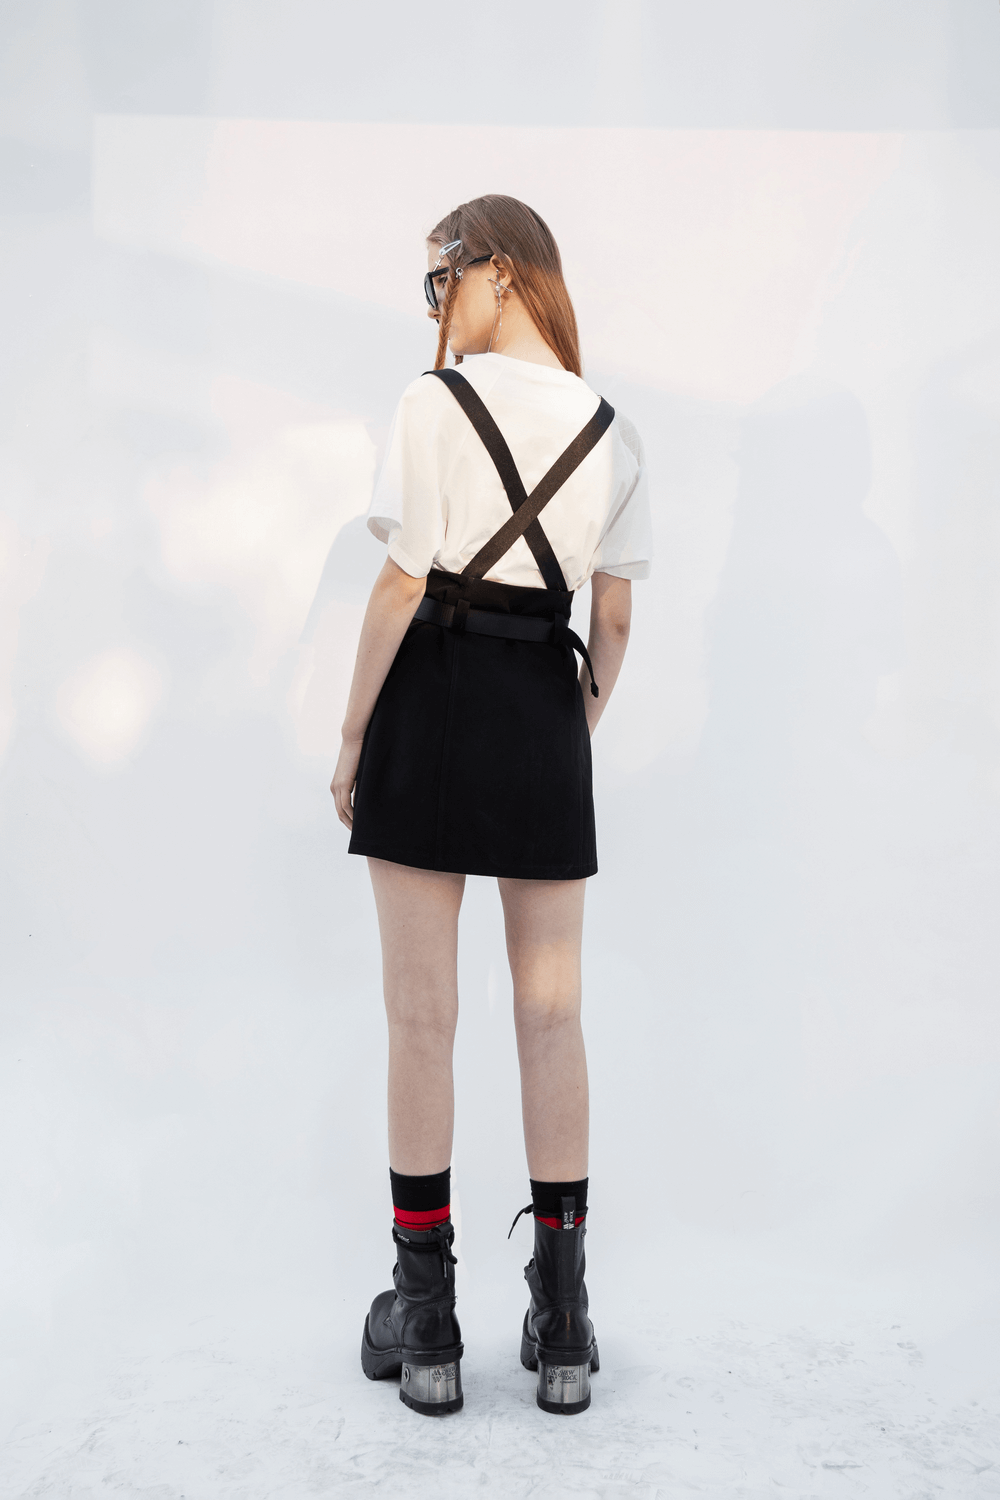 Edgy A-Line Mini Skirt with Detachable Chain Straps